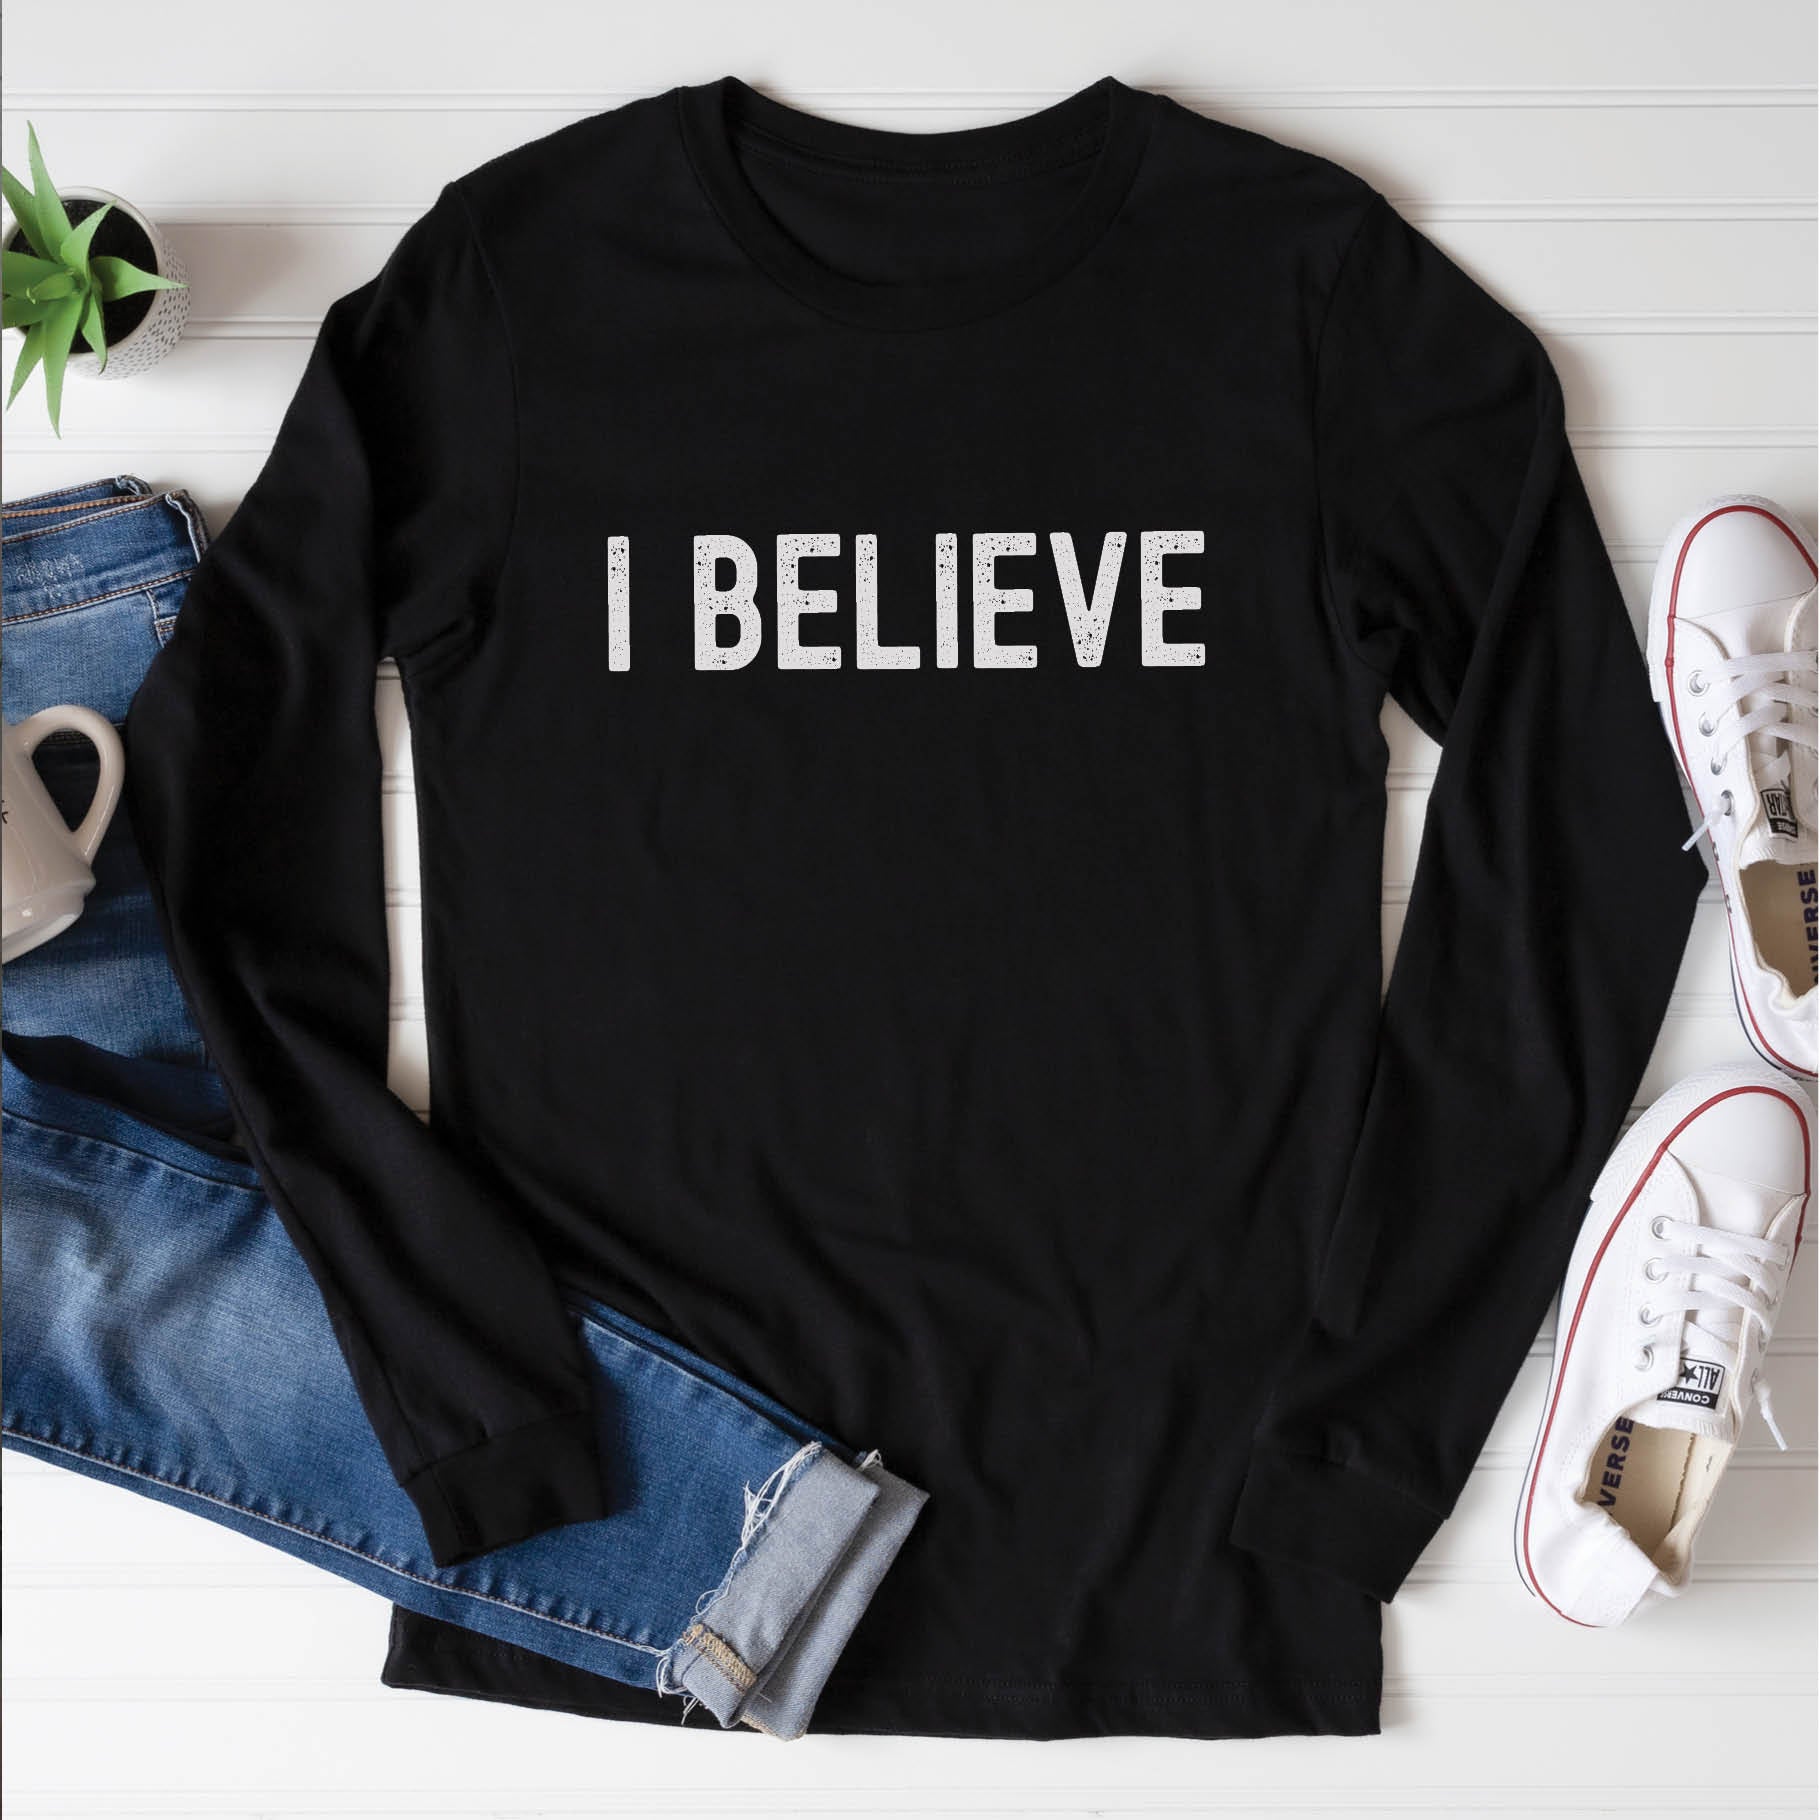 Black cozy long sleeve t-shirt with a bold faith-based statement "I BELIEVE" distressed typography design printed in white, created for Christian men and women Jesus believers